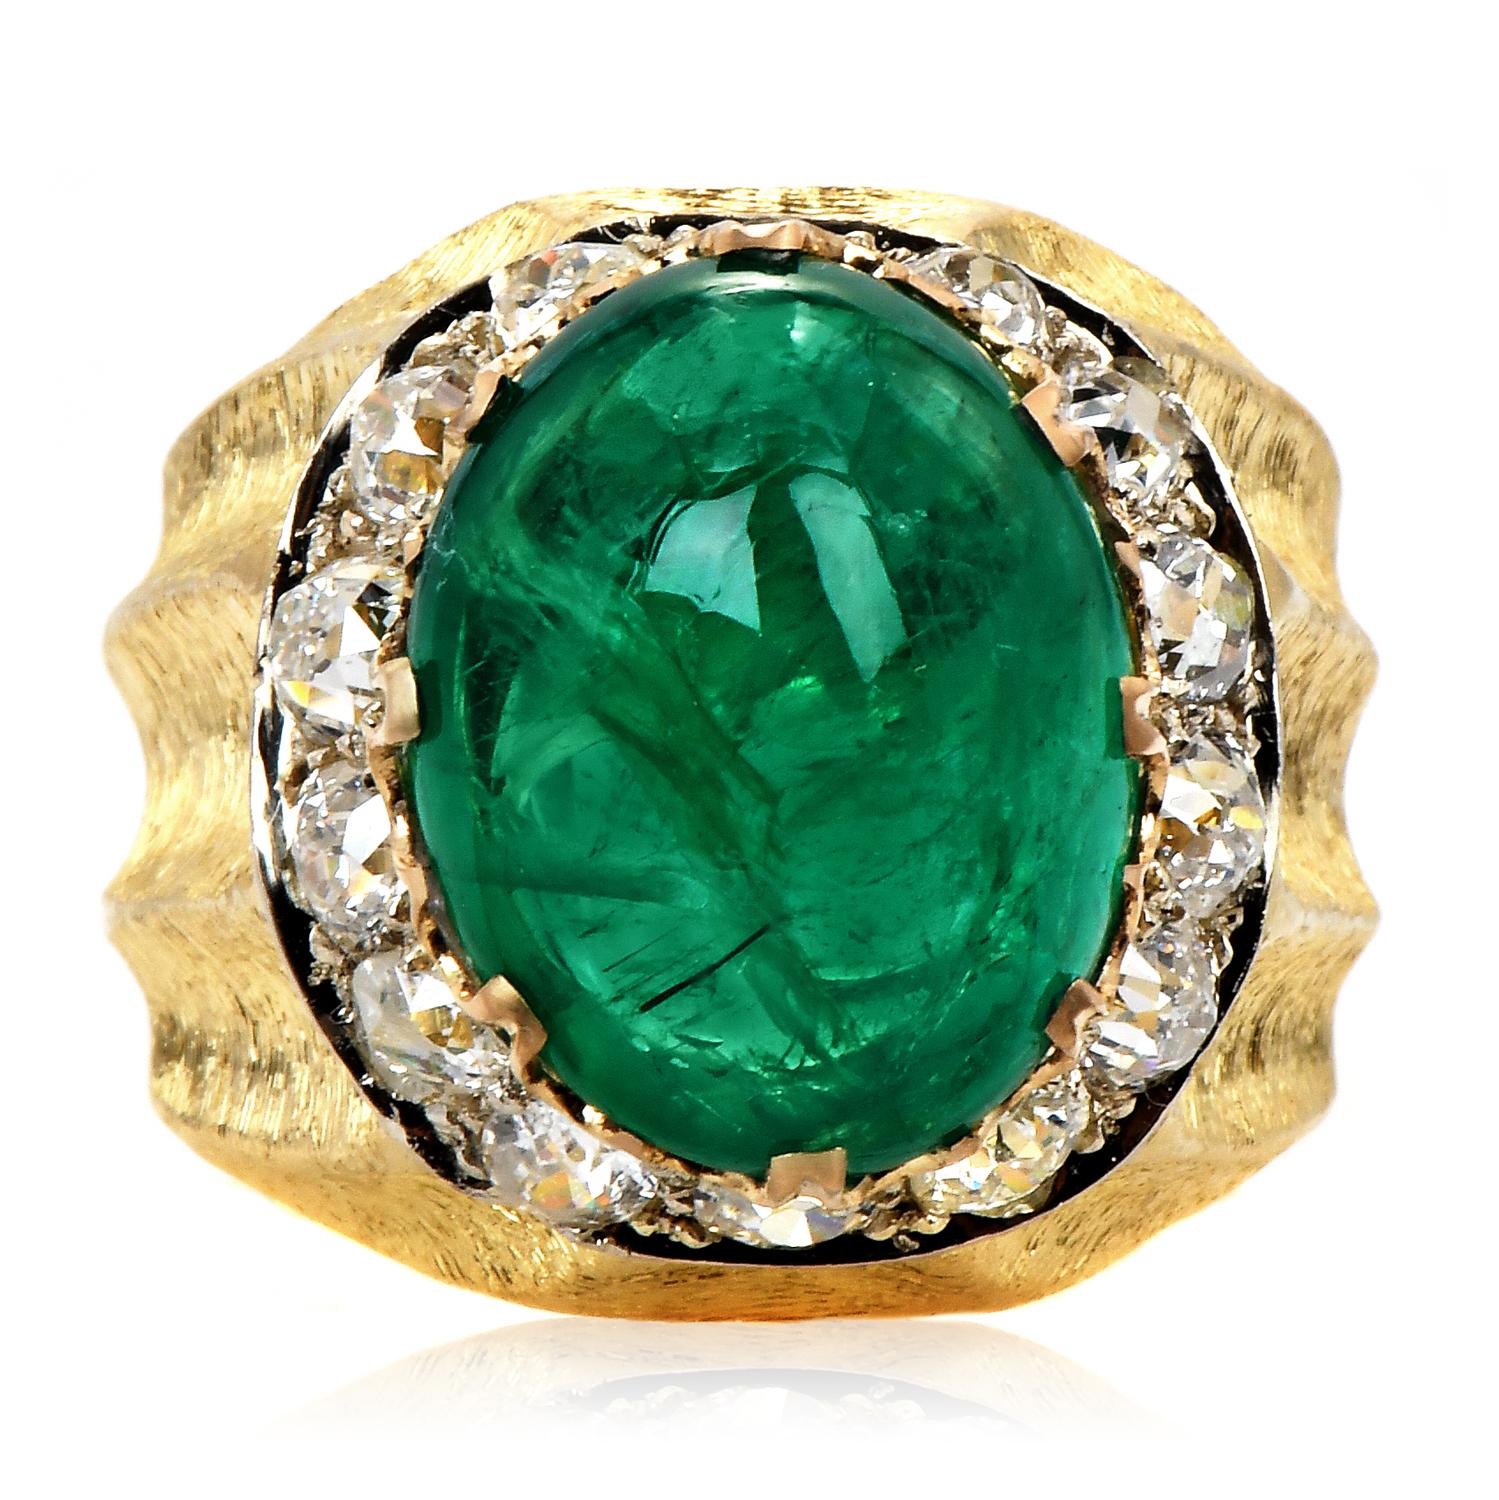 This stunning designer Buccellati ring is finely crafted in solid 18K yellow gold. It displays one translucent genuine Cabochon-shaped Colombian Emerald approx. 9.64 carats. The exquisite Designer item is accented with 60 genuine Old Mine round cut